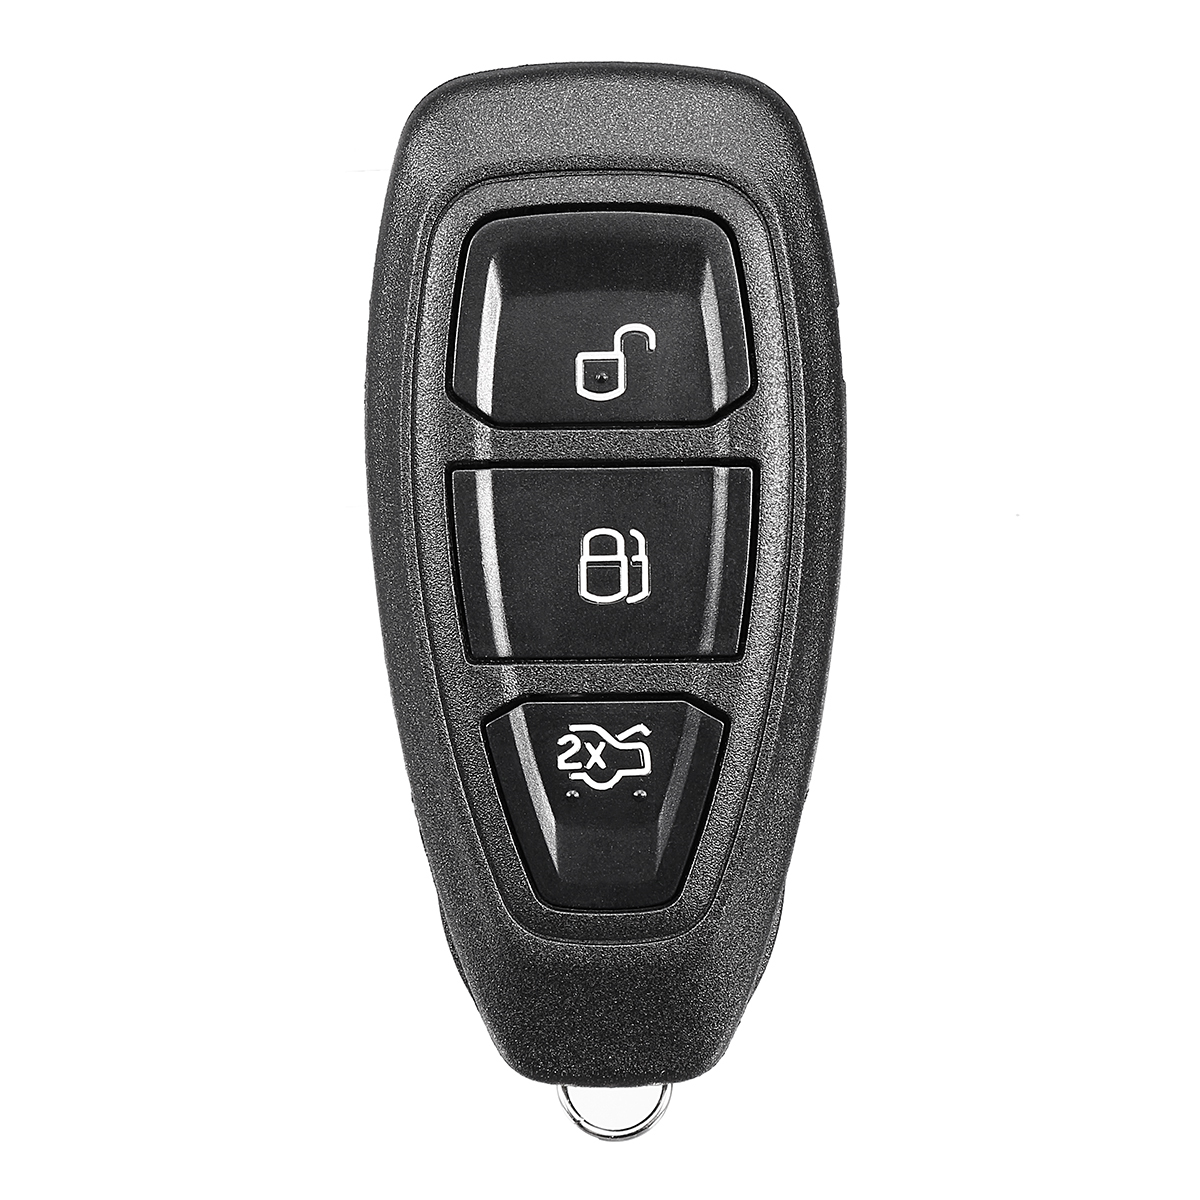 3 Buttons Remote Key Fob 433MHz Replacement for Ford B-Max C-Max #KR55WK48801 1